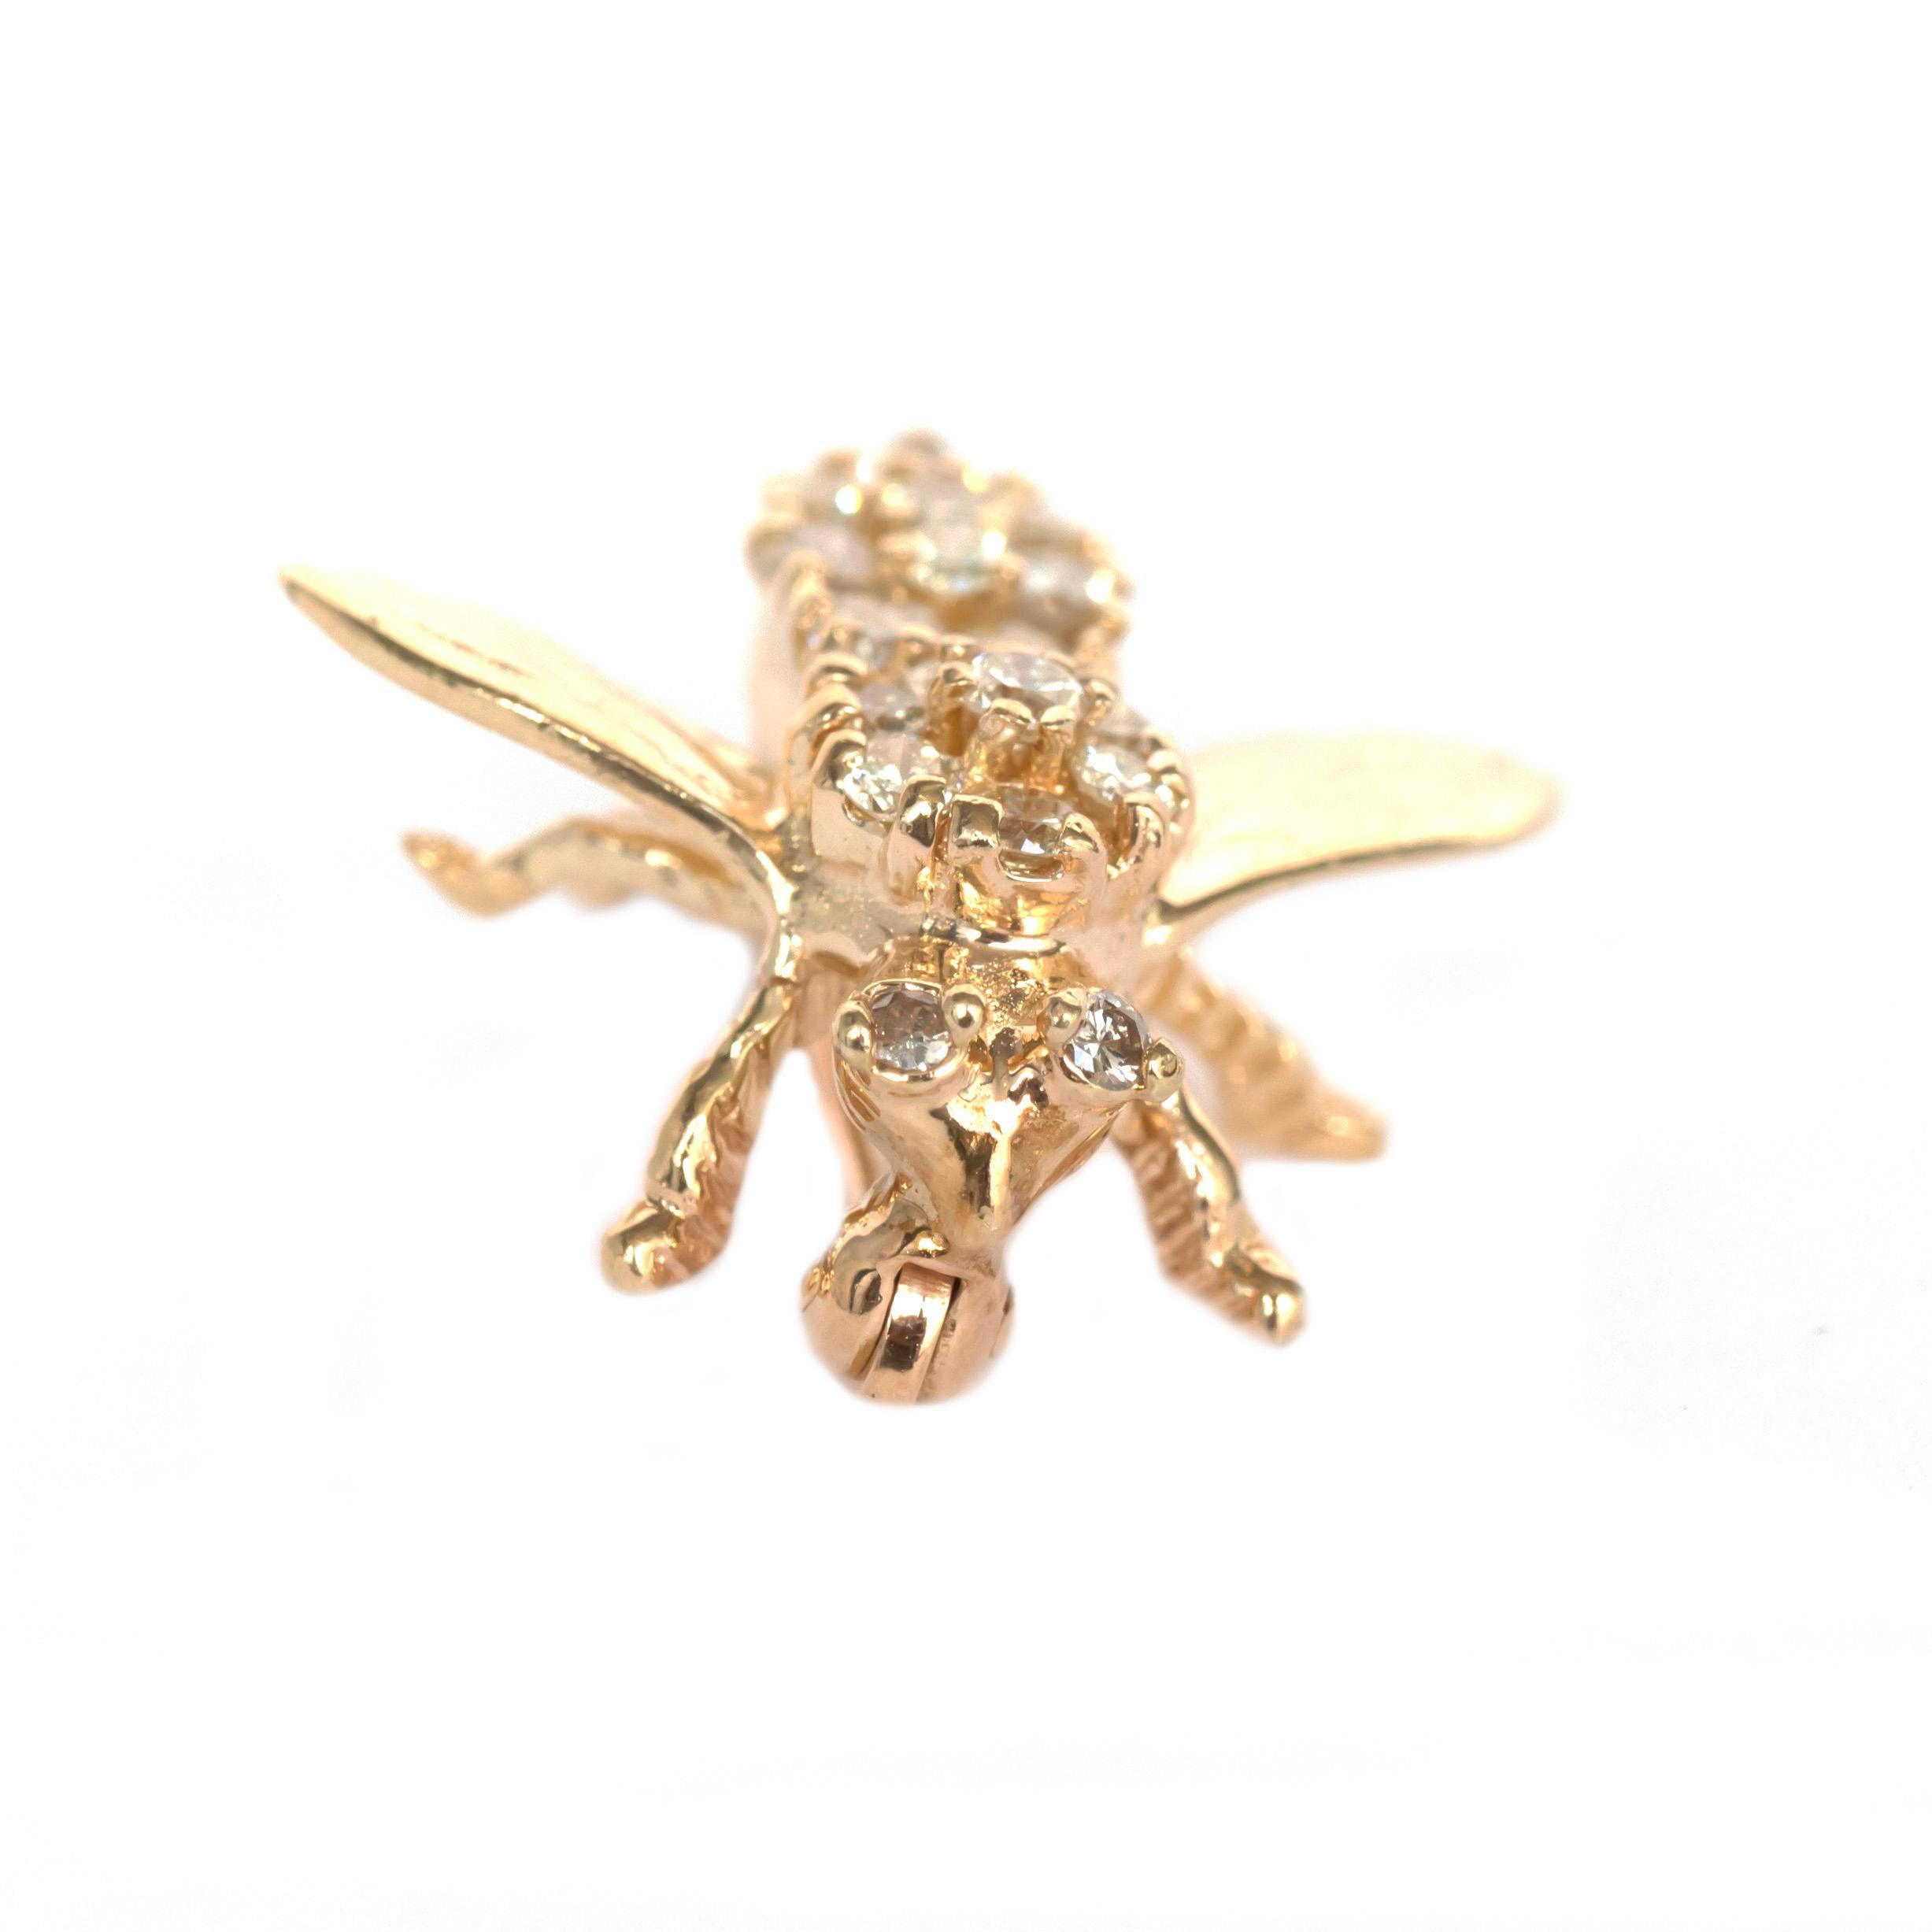 Metal Type: 14 karat Yellow Gold [Tested]
Weight:  2.4 grams

Stone Details:
Type: Diamond
Weight: .50 carat, total weight
Cut: Round Brilliant
Color: G-H
Clarity: VS

Condition:  Excellent